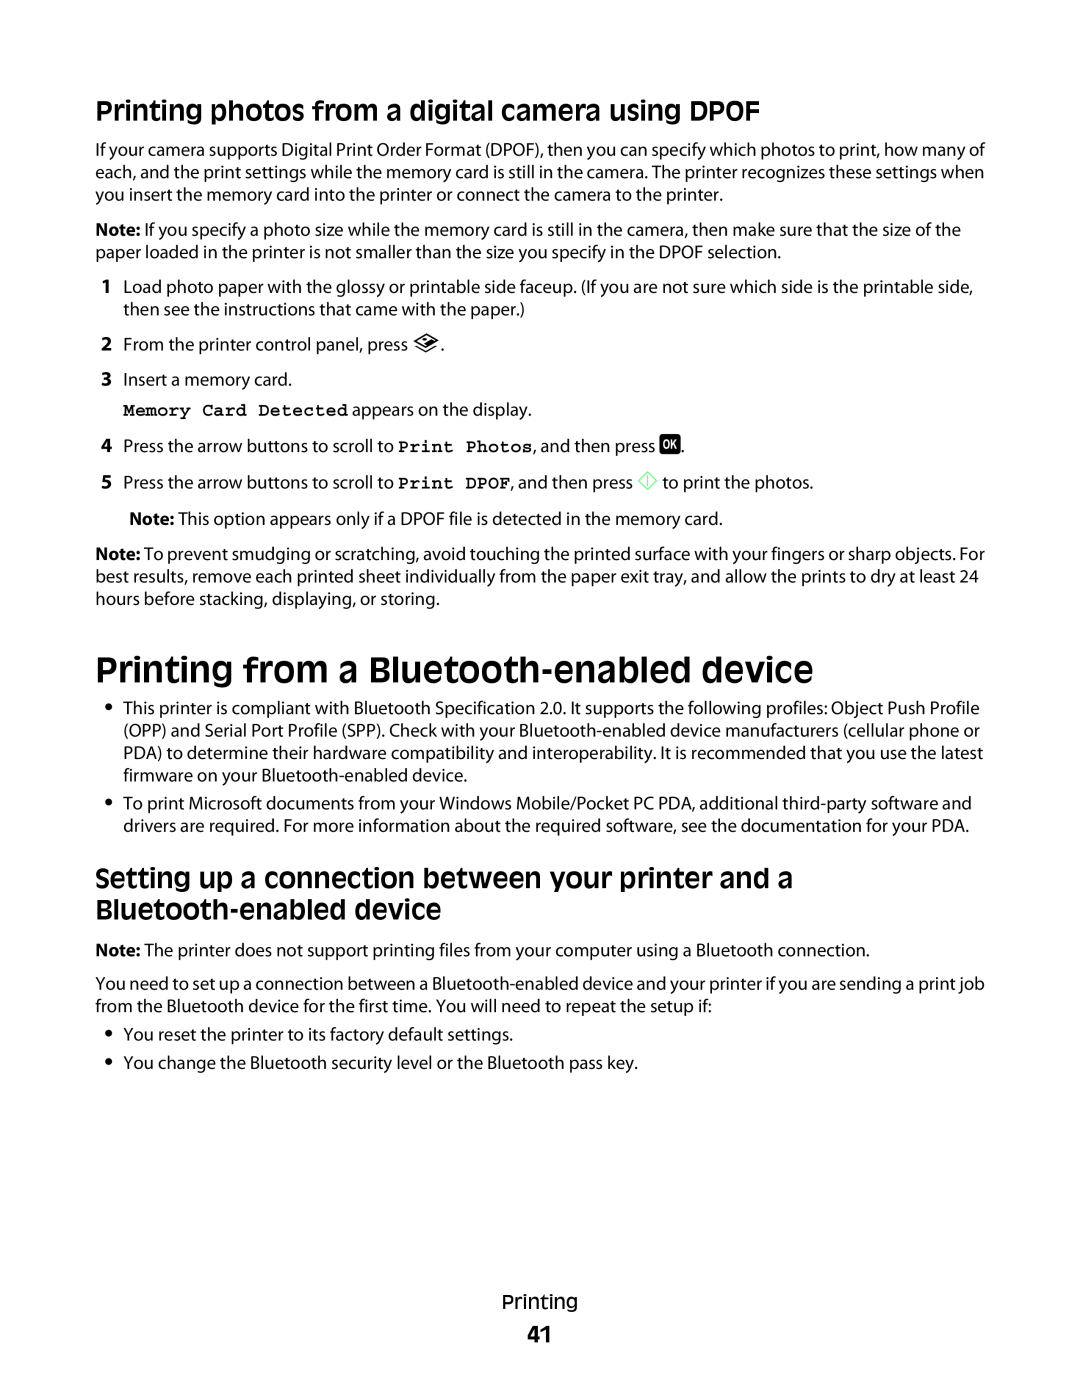 Dell V515W manual Printing from a Bluetooth-enabled device, Printing photos from a digital camera using DPOF 